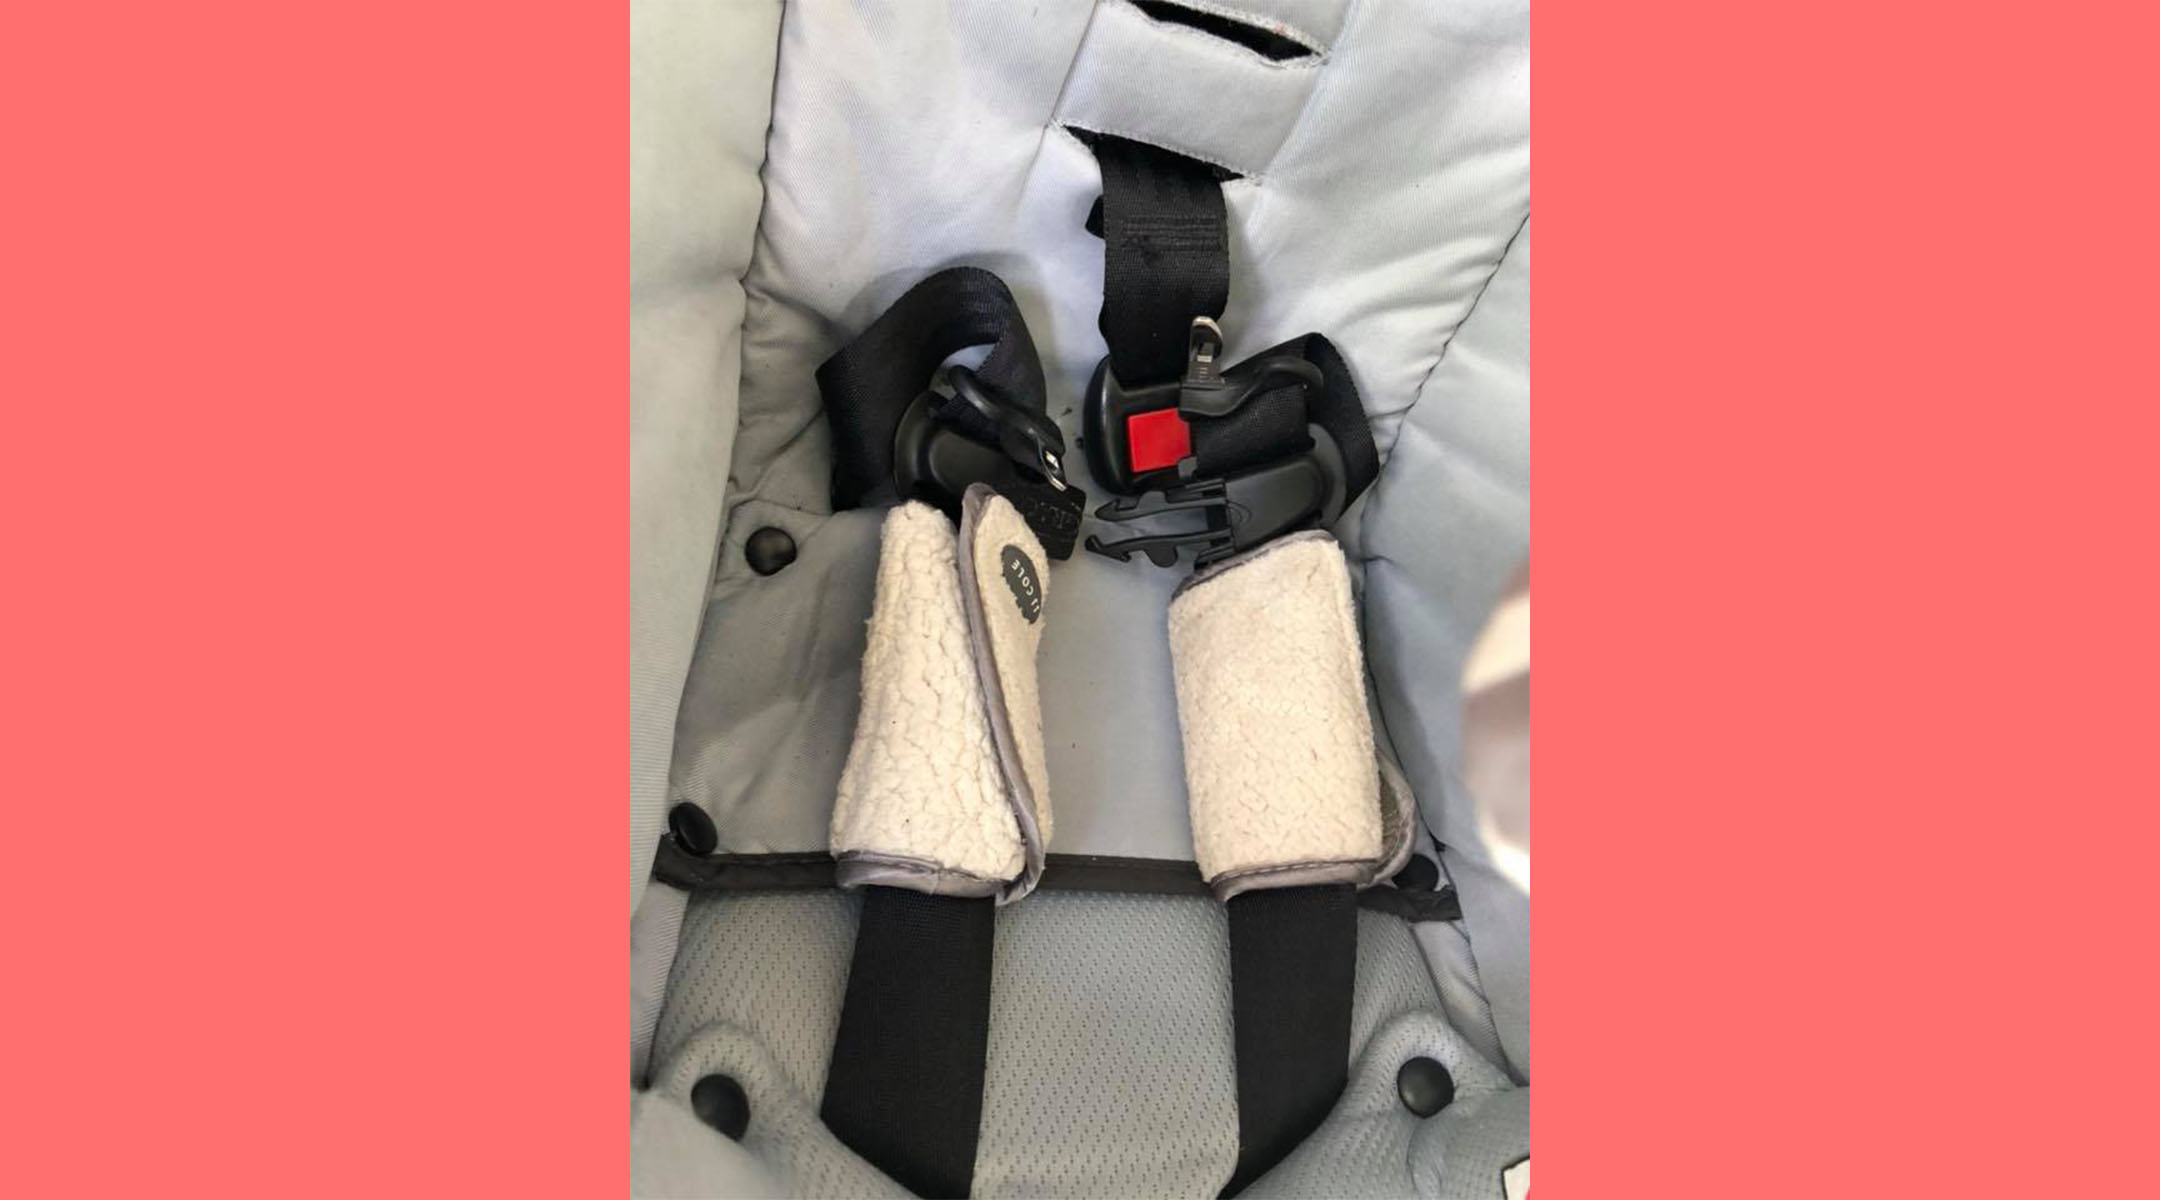 car seat straps with sheepskin liners